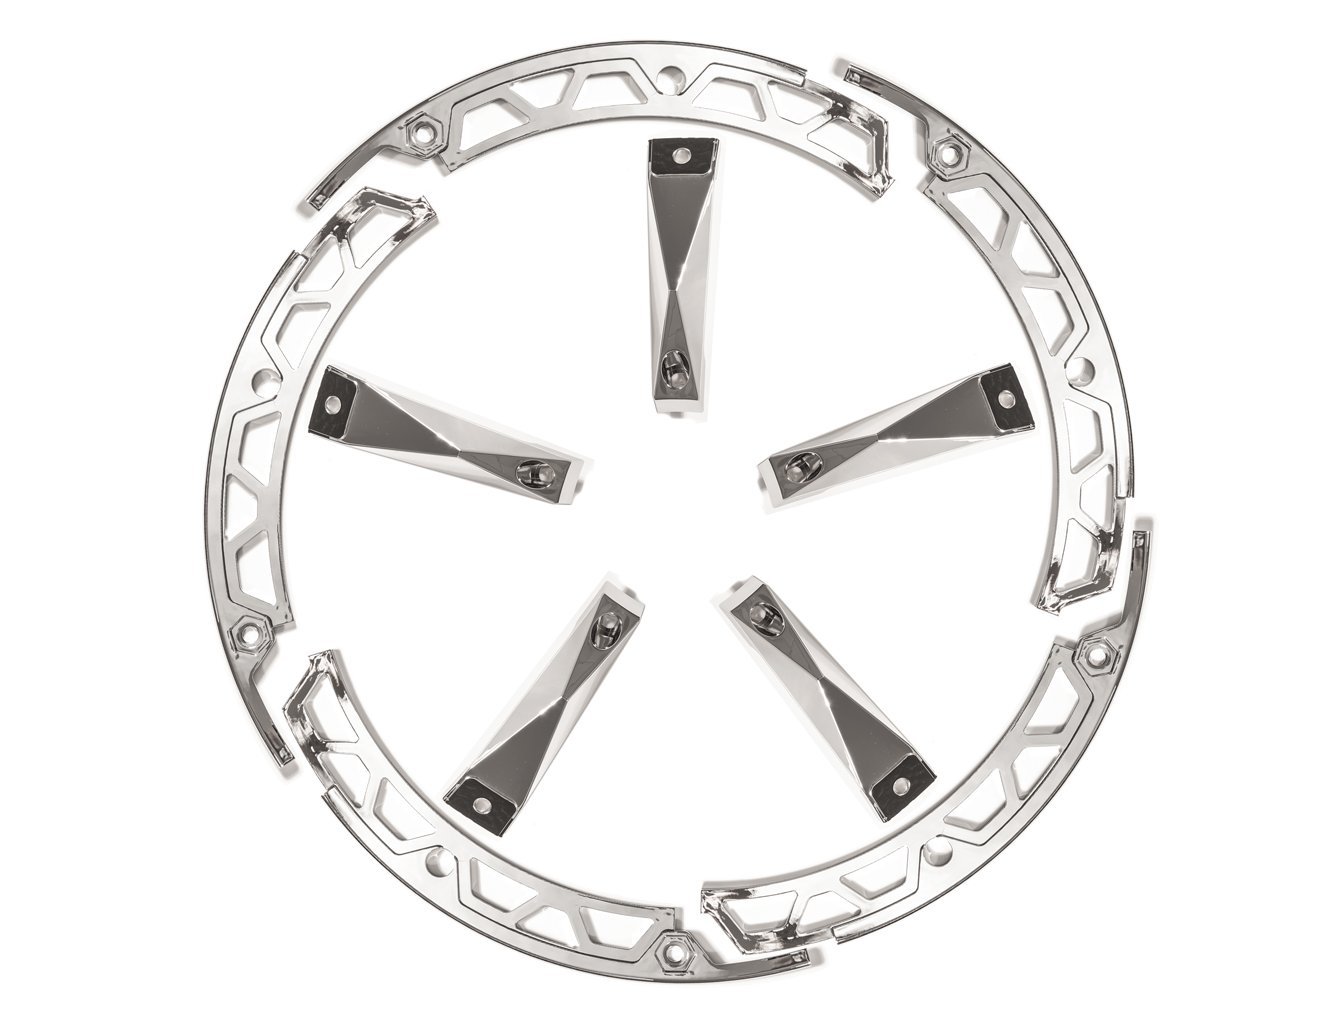 GD04A-Series Wheel Insert, Fits Wheel Size: 18 x 9 in., Direction: Non-Directional [Chrome]